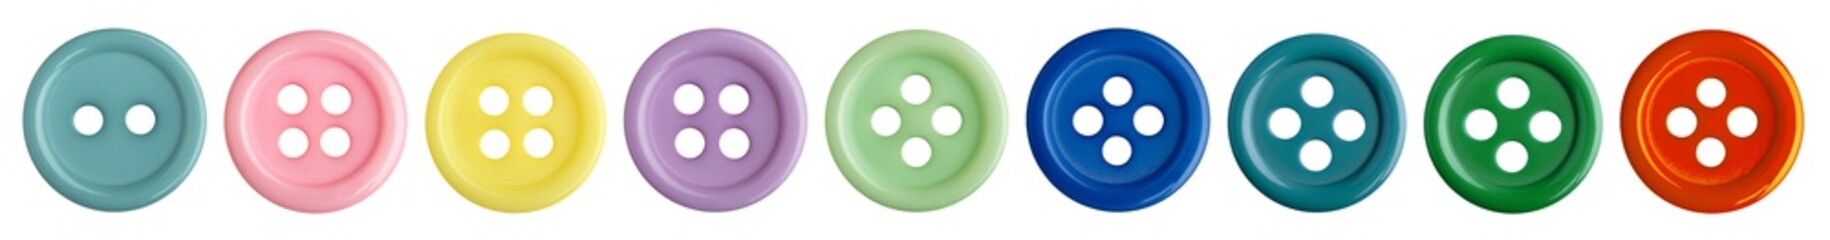 Set of sewing buttons for fashion clothes isolated on white background. Colored fashion buttons...